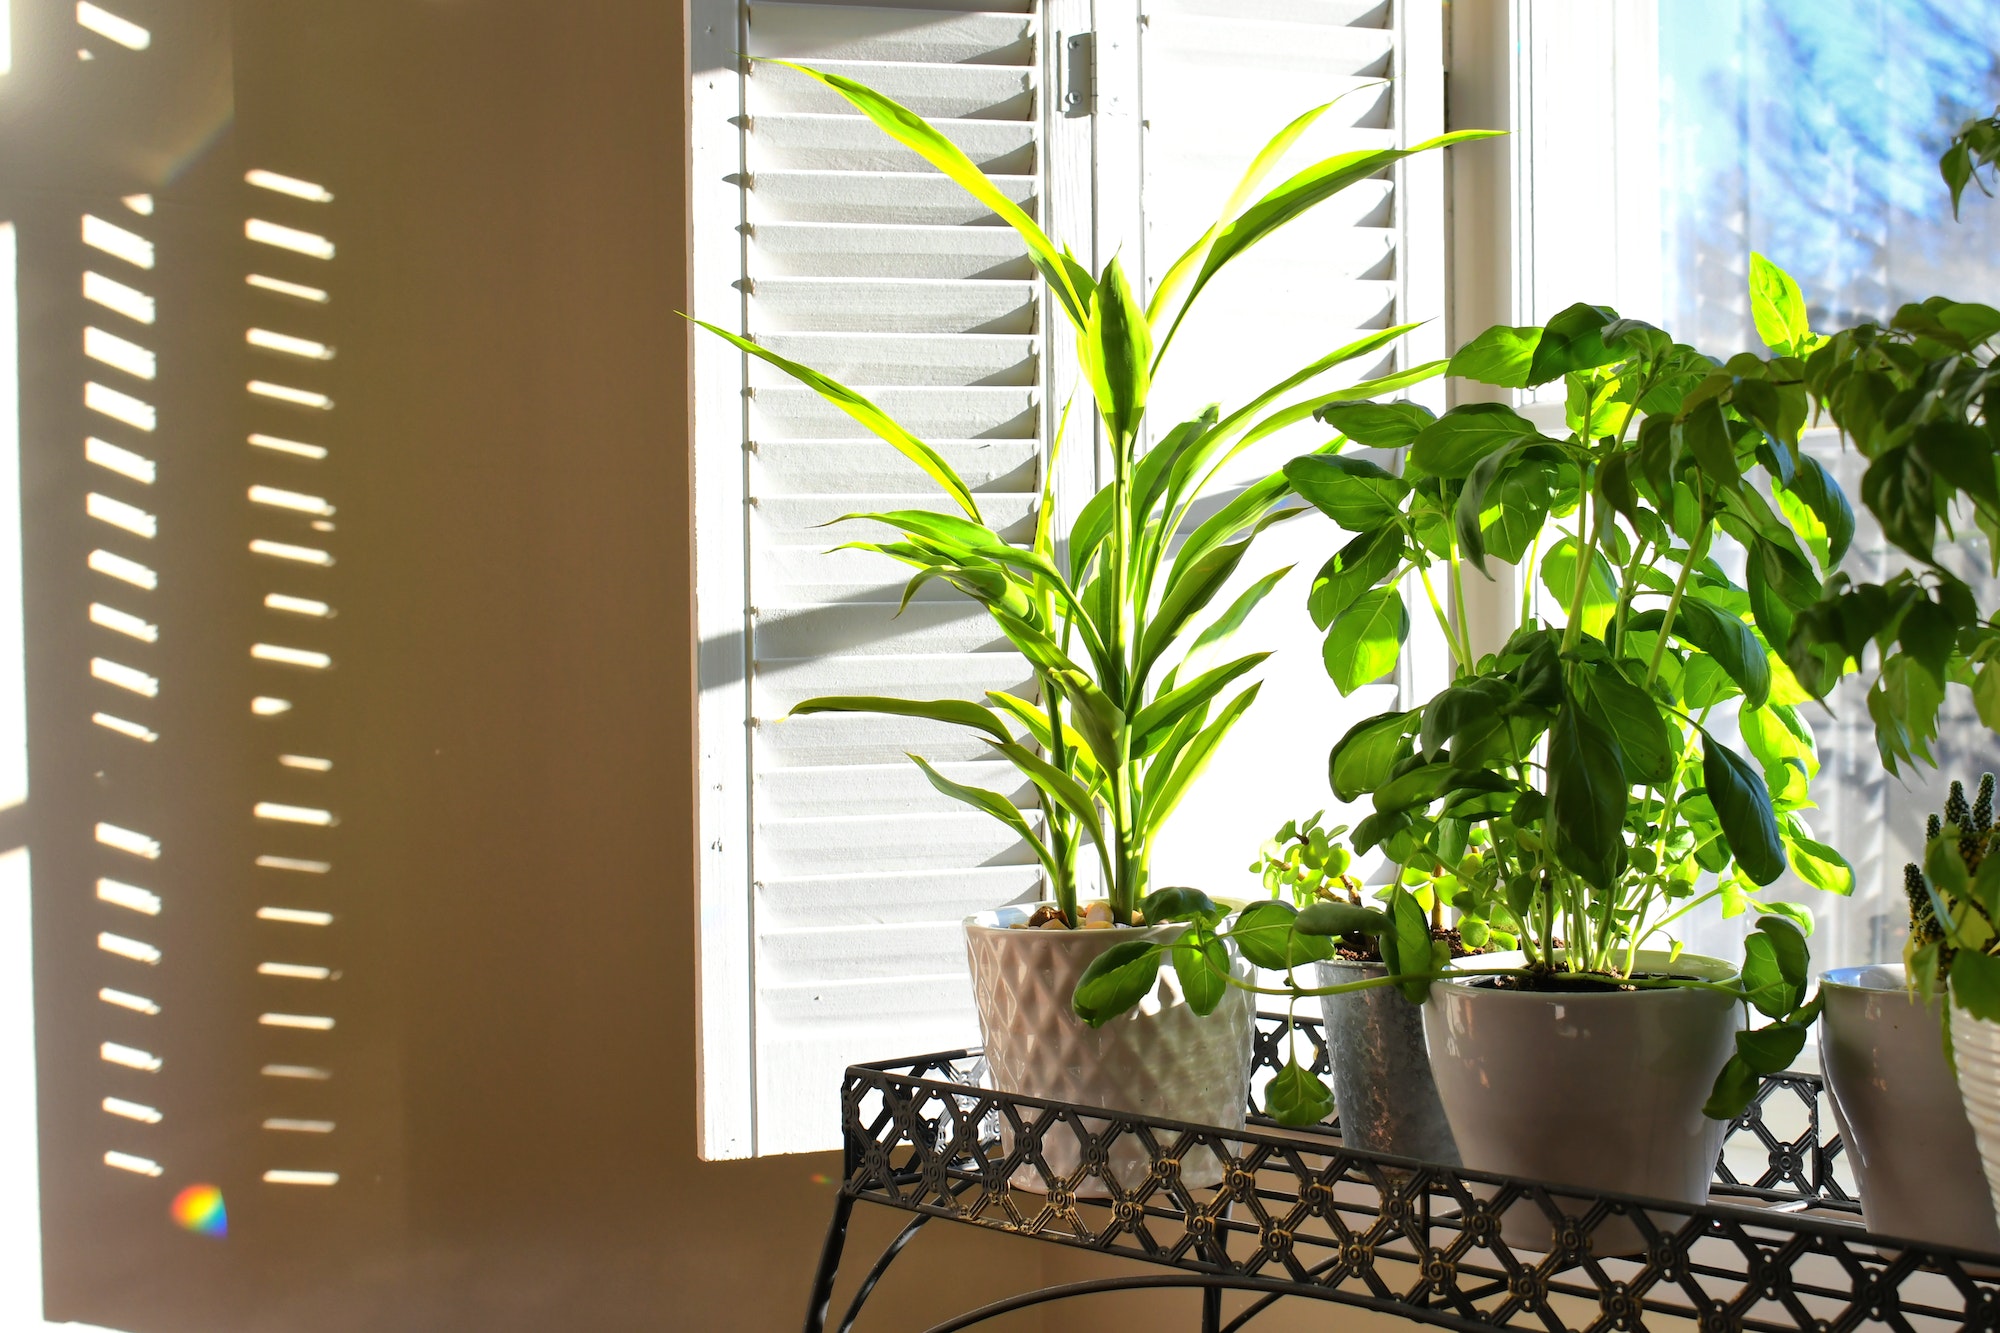 Plants growing in a sunny window. Early morning light shadows with white plantation shutters.